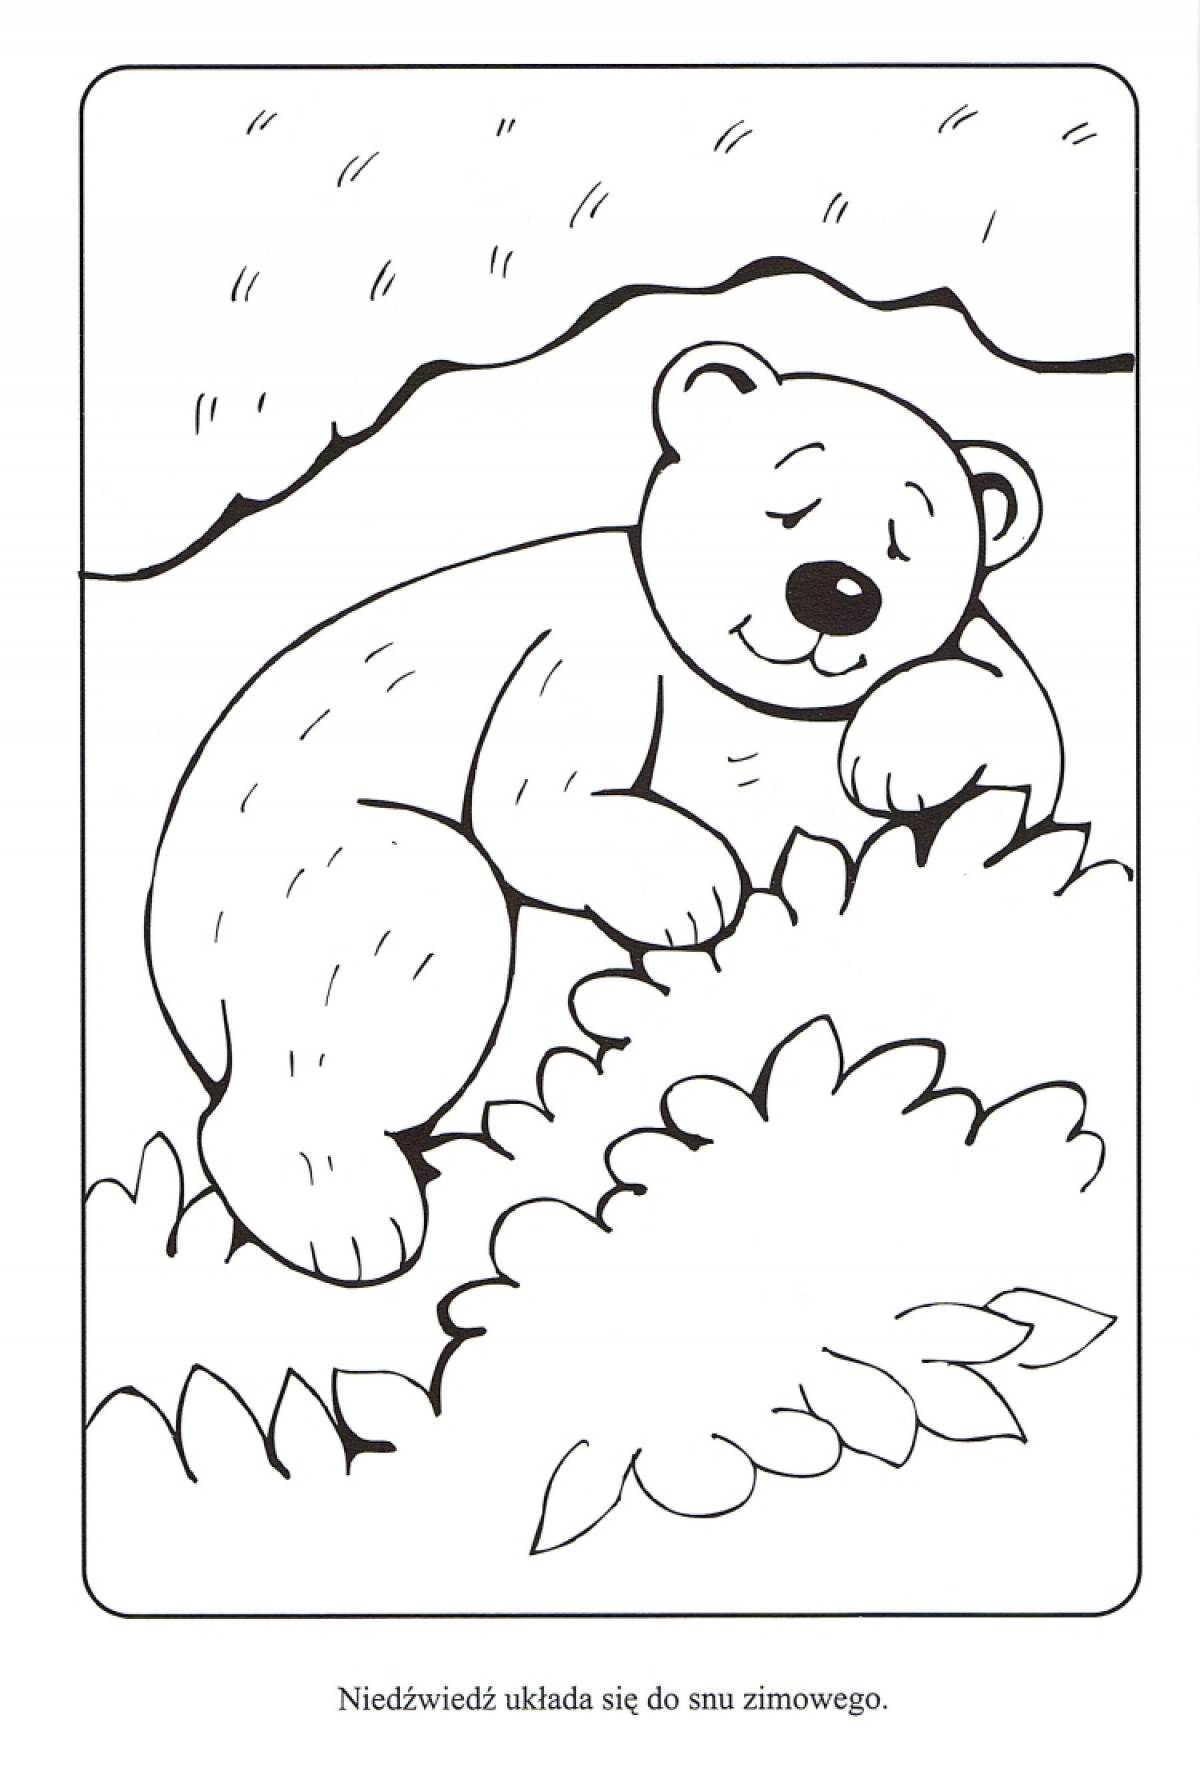 Calming coloring book: why do bears sleep in winter?